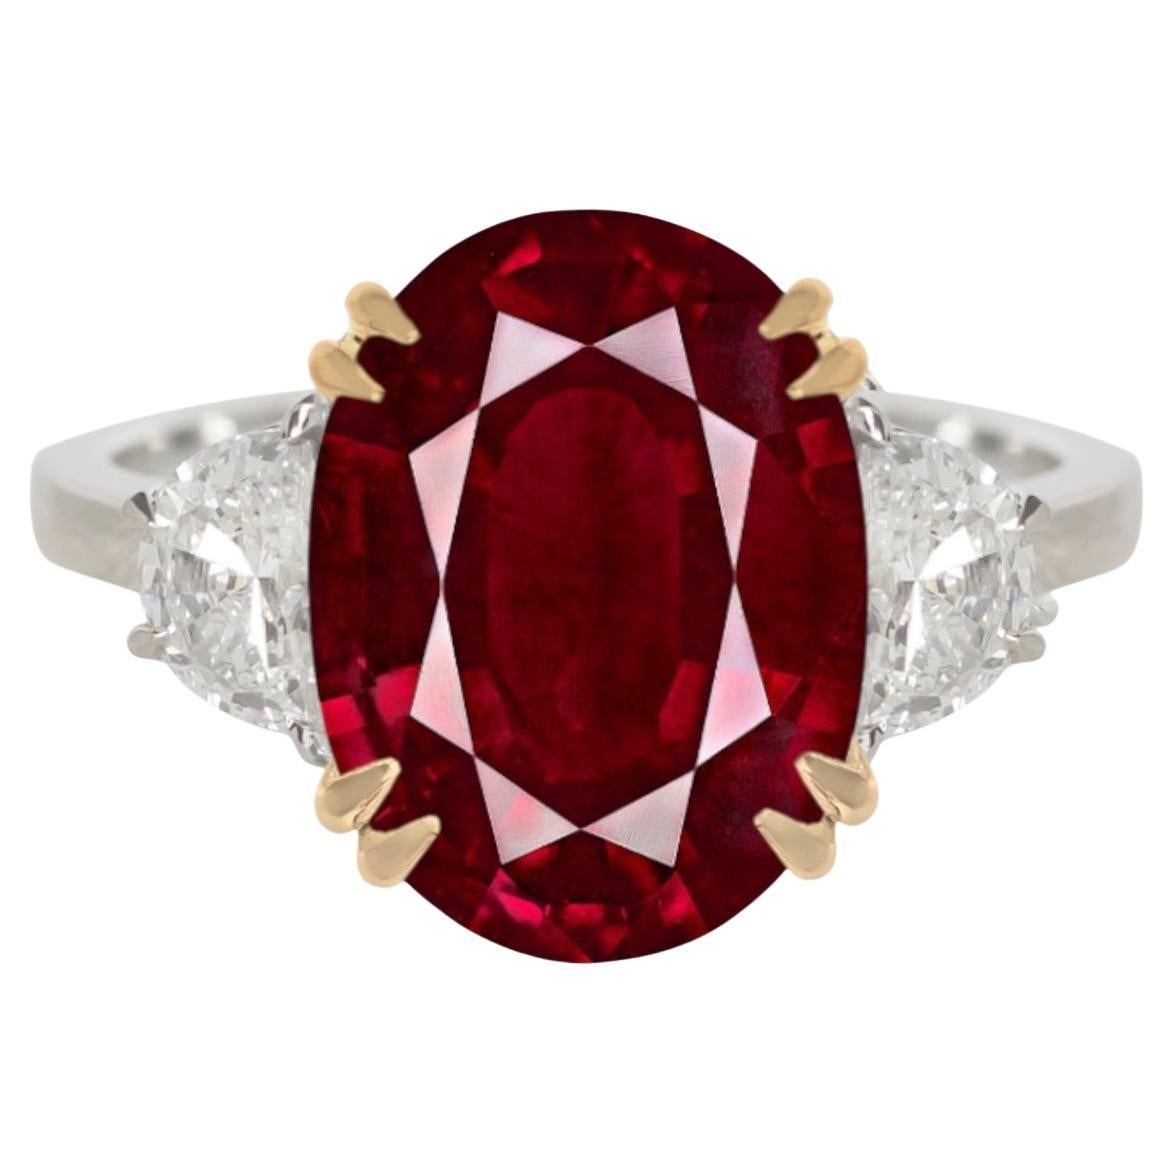 IGI Antwerp Certified 4.75 Carat Oval Red Ruby Ring For Sale